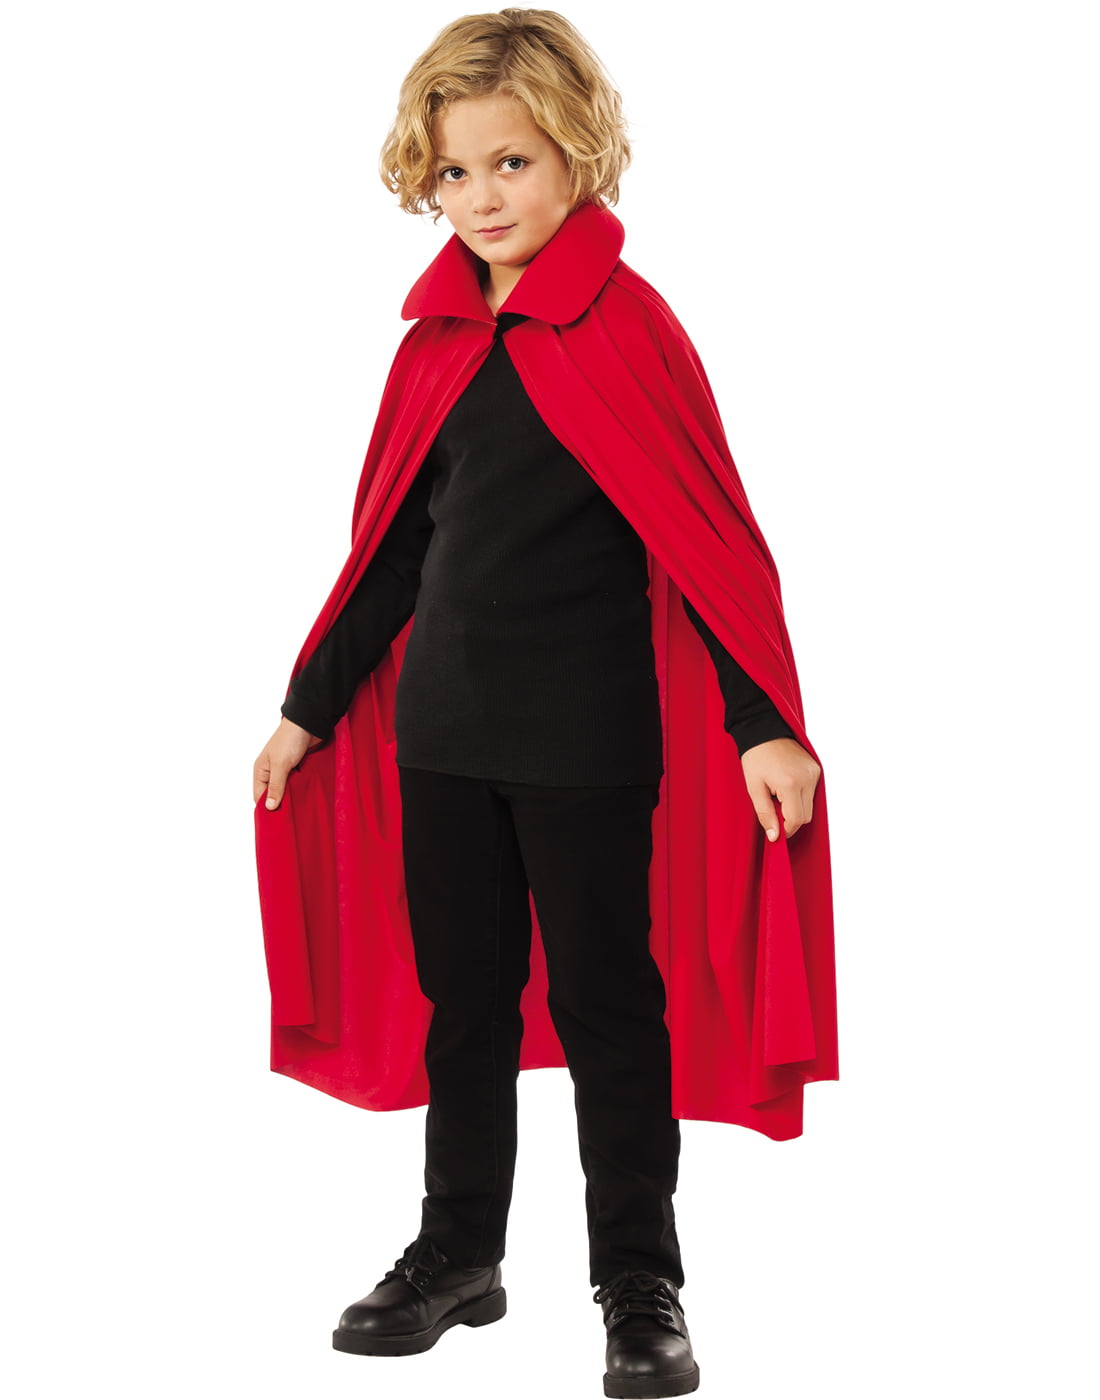 Red 36 Inch Adult Short Vampire Costume Cape Robe With Collar - Walmart.com